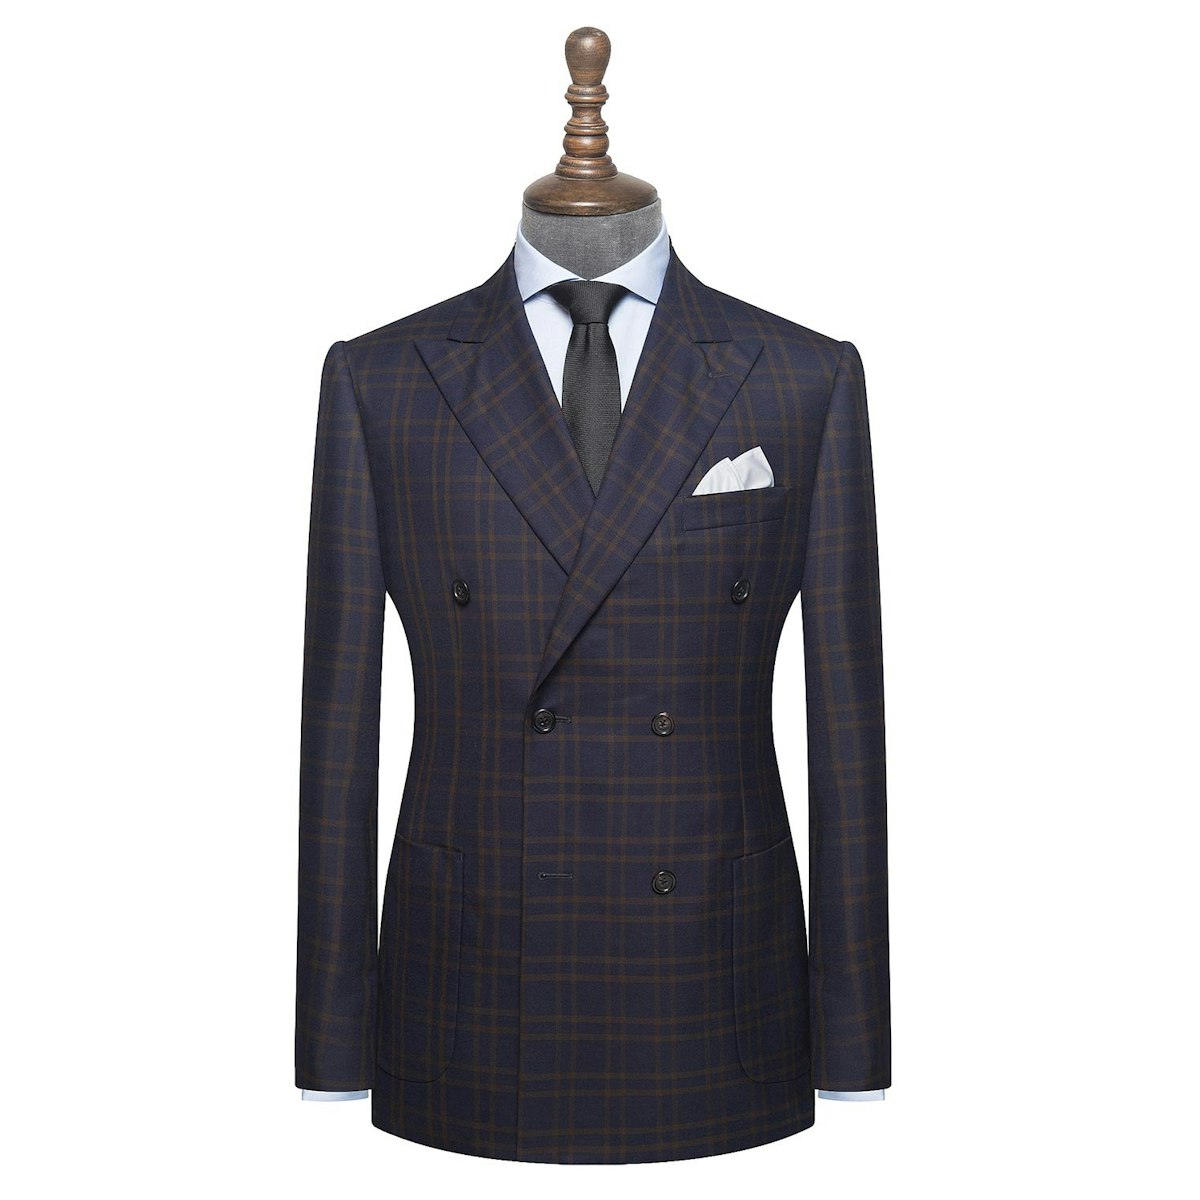 InStitchu Collection The Morecambe mens suit